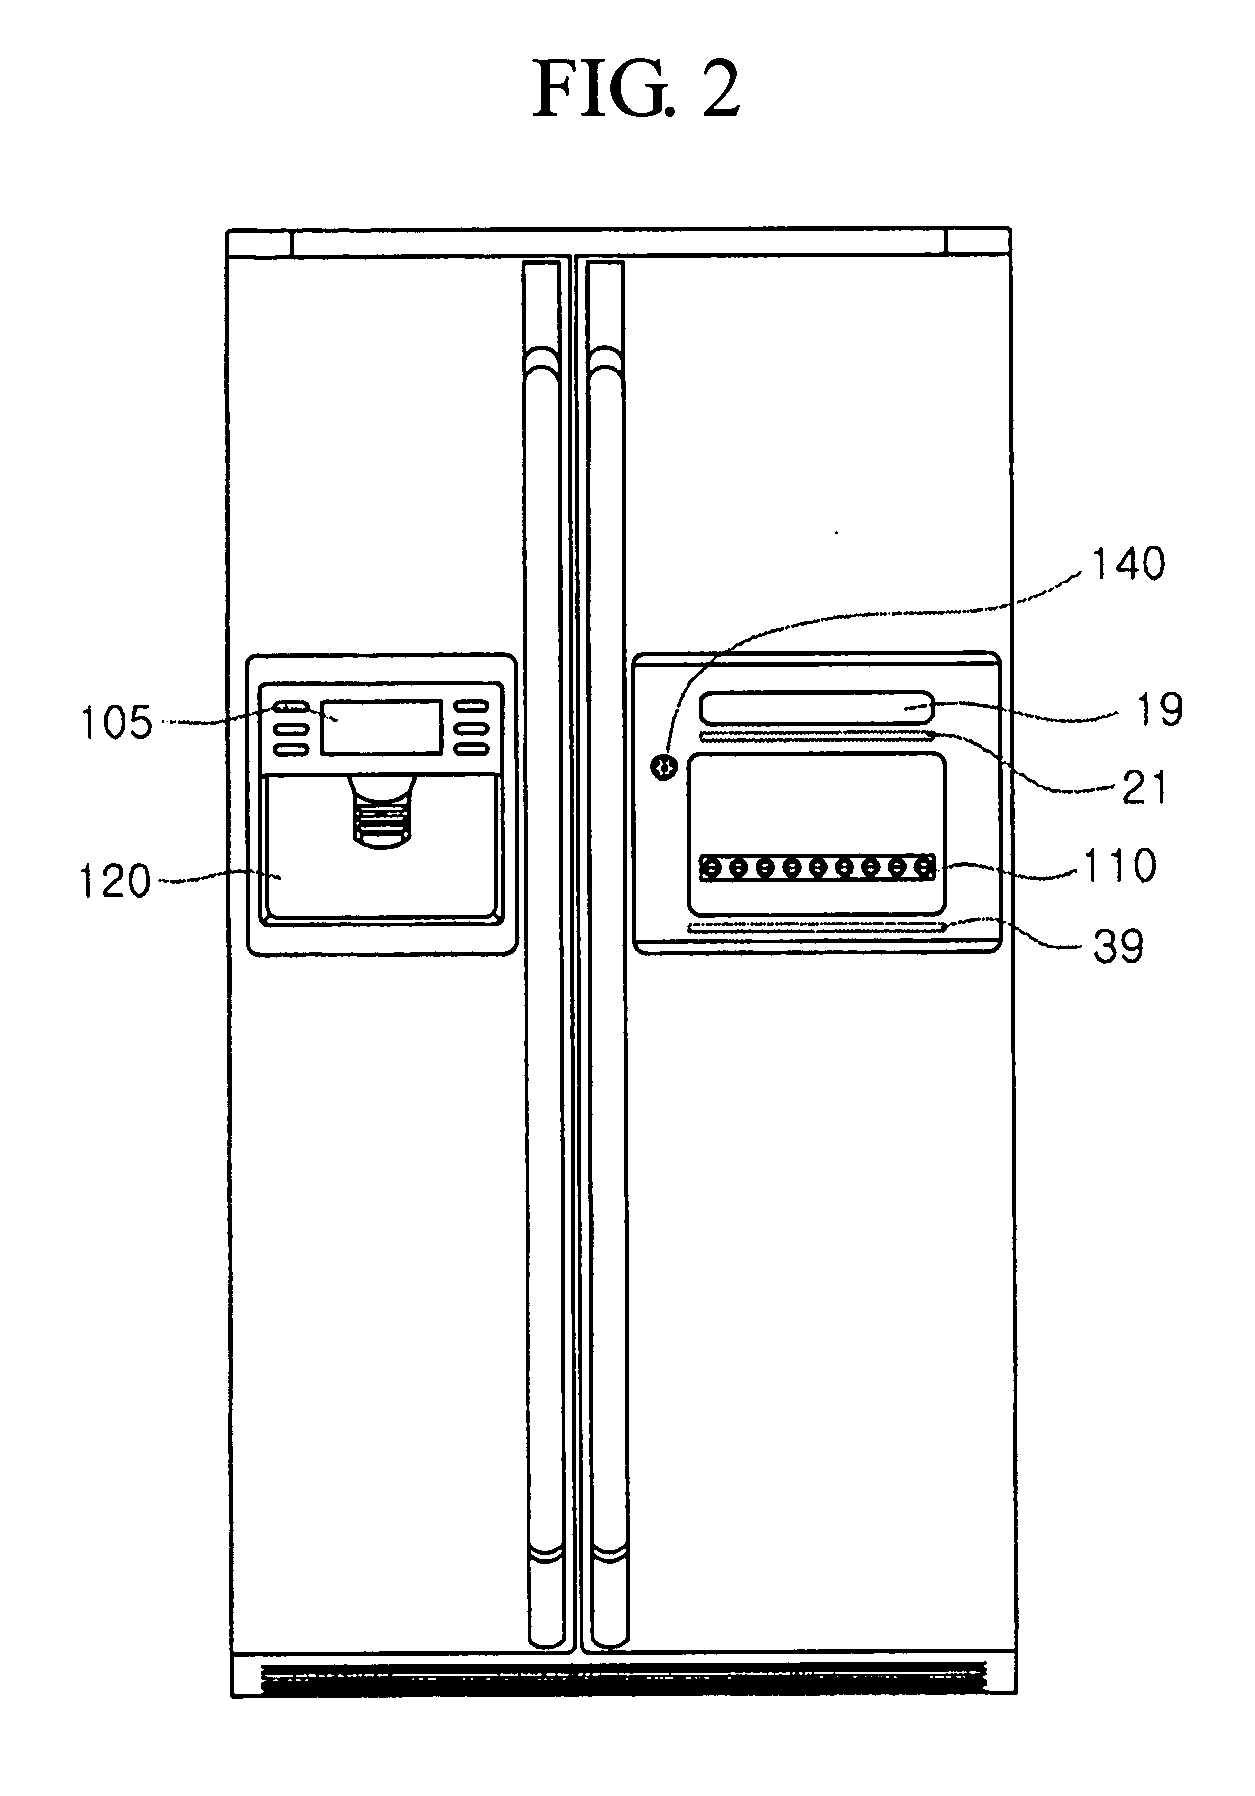 Apparatus and method for controlling fan of refrigerator with television/radio module